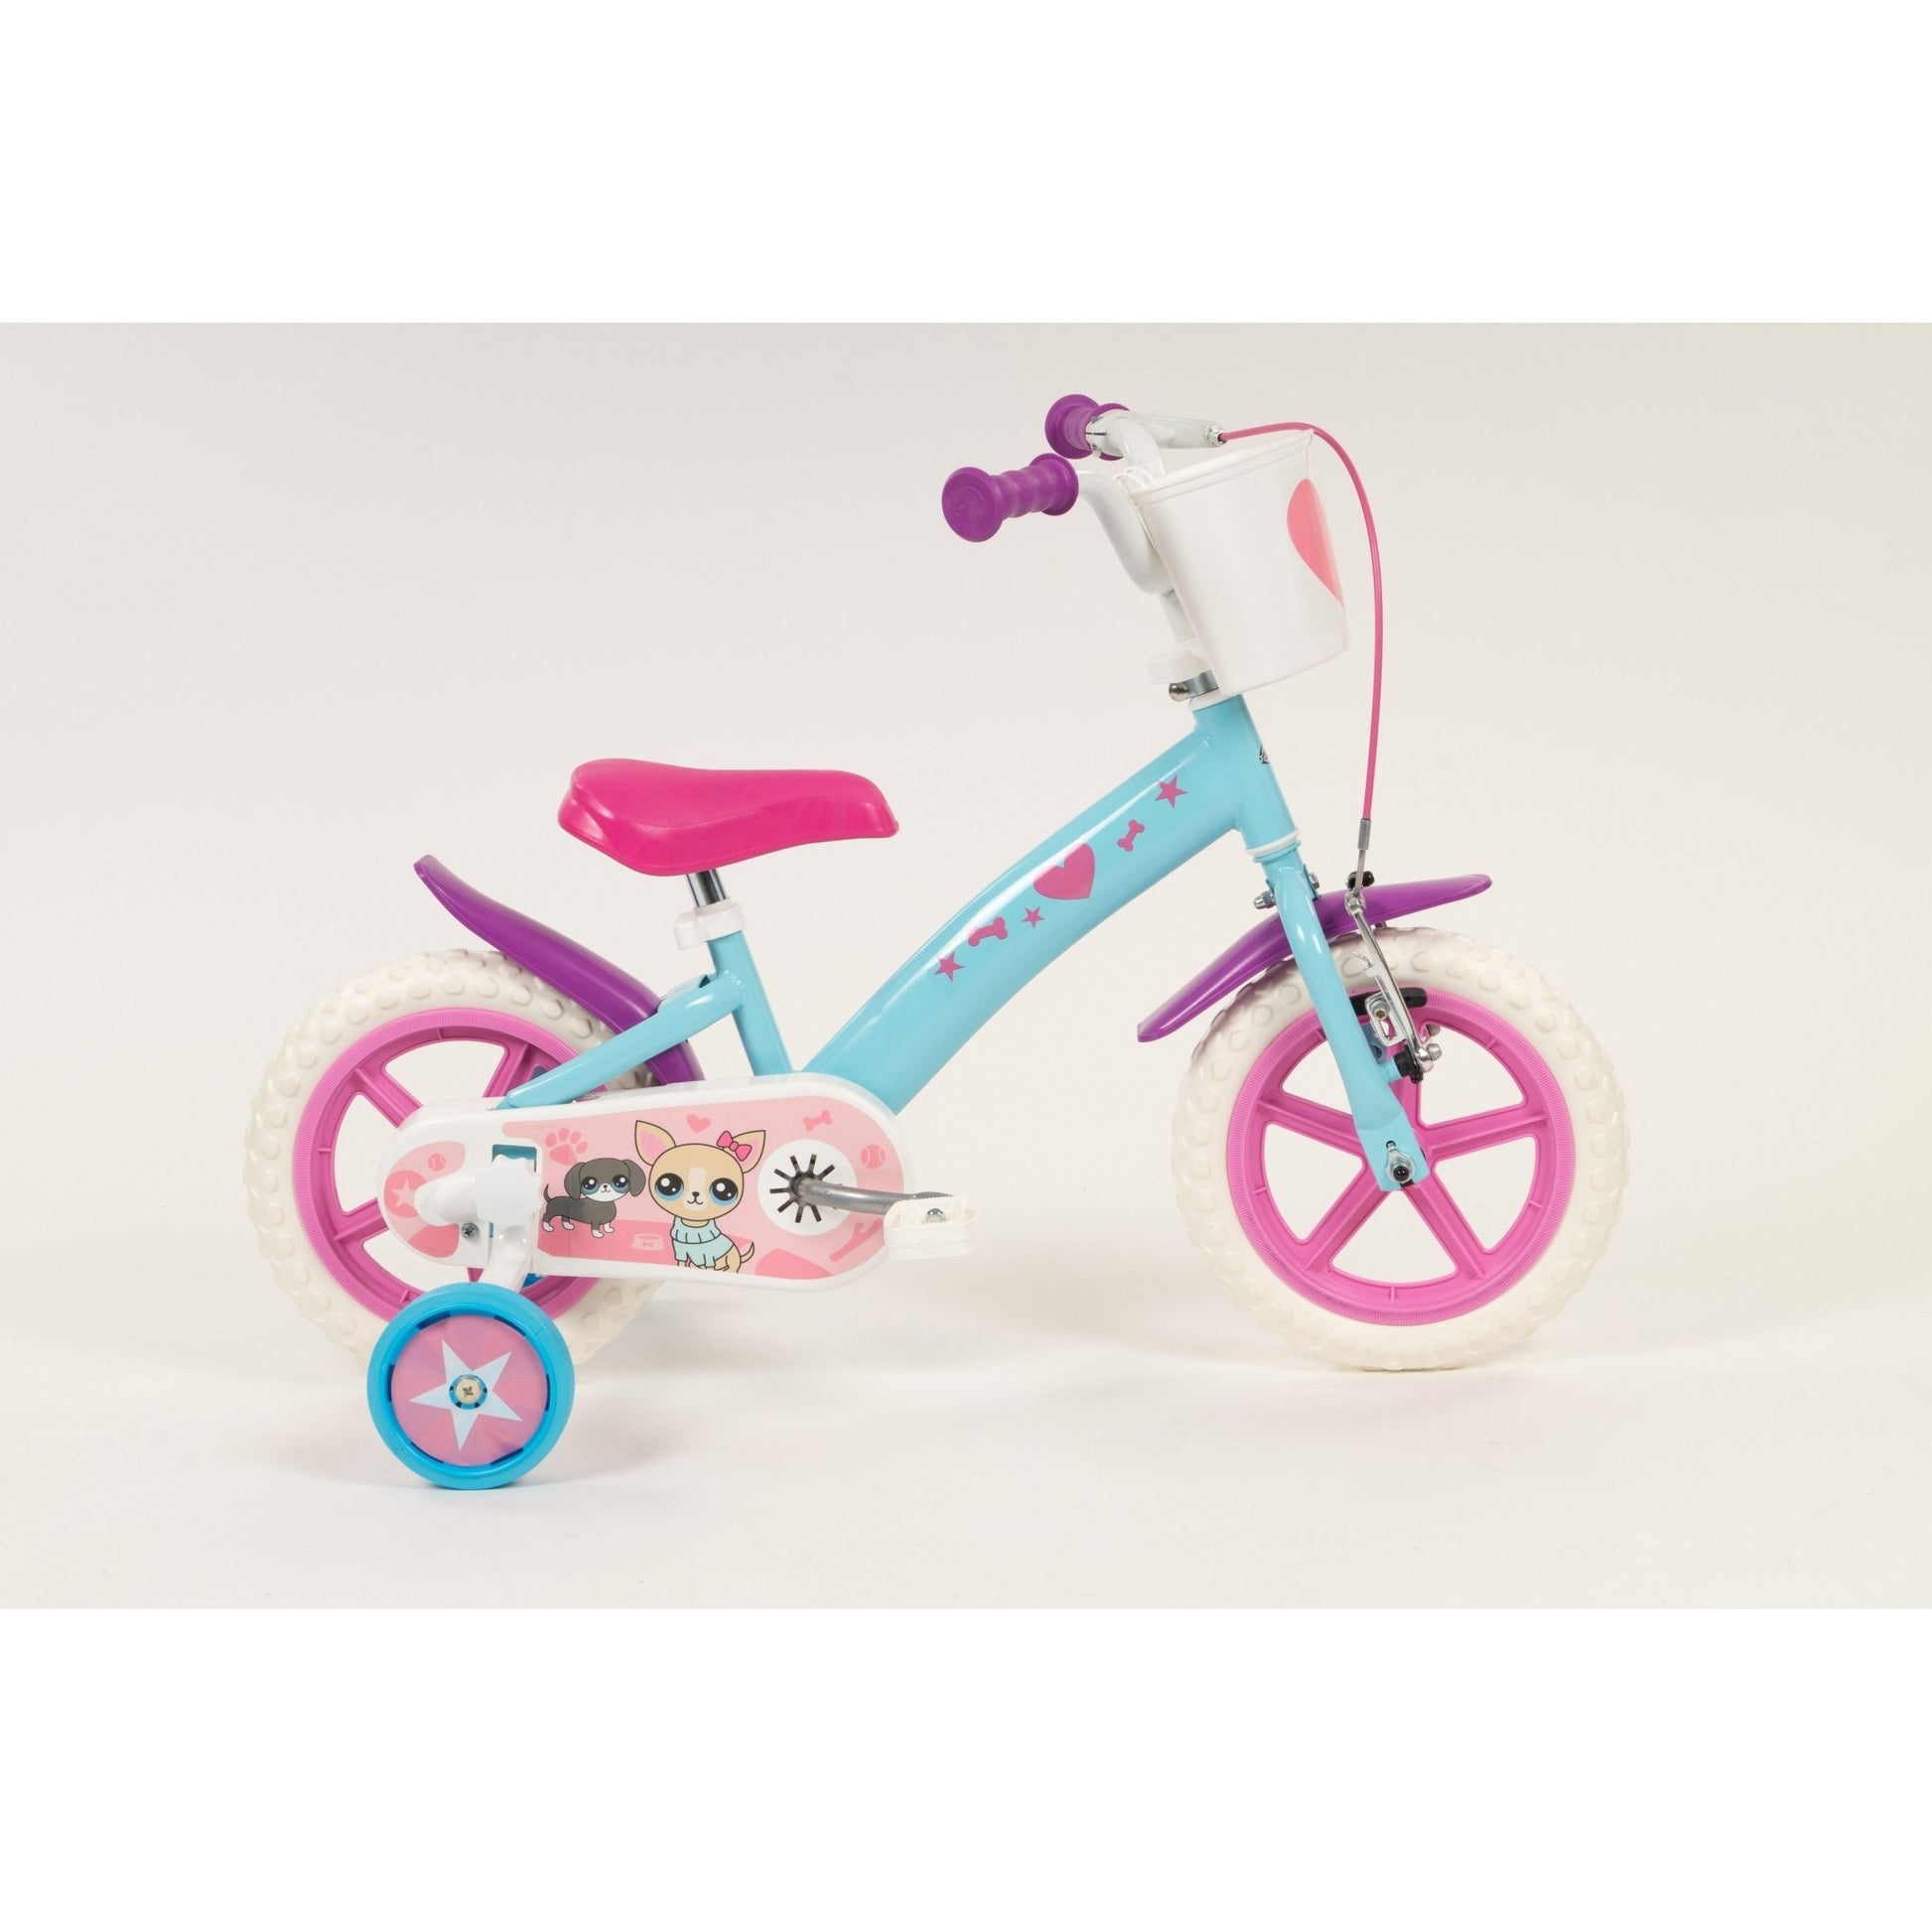 Pets Childrens Bicycle - Available in 3 Sizes - The Online Toy Shop - Bicycle - 1